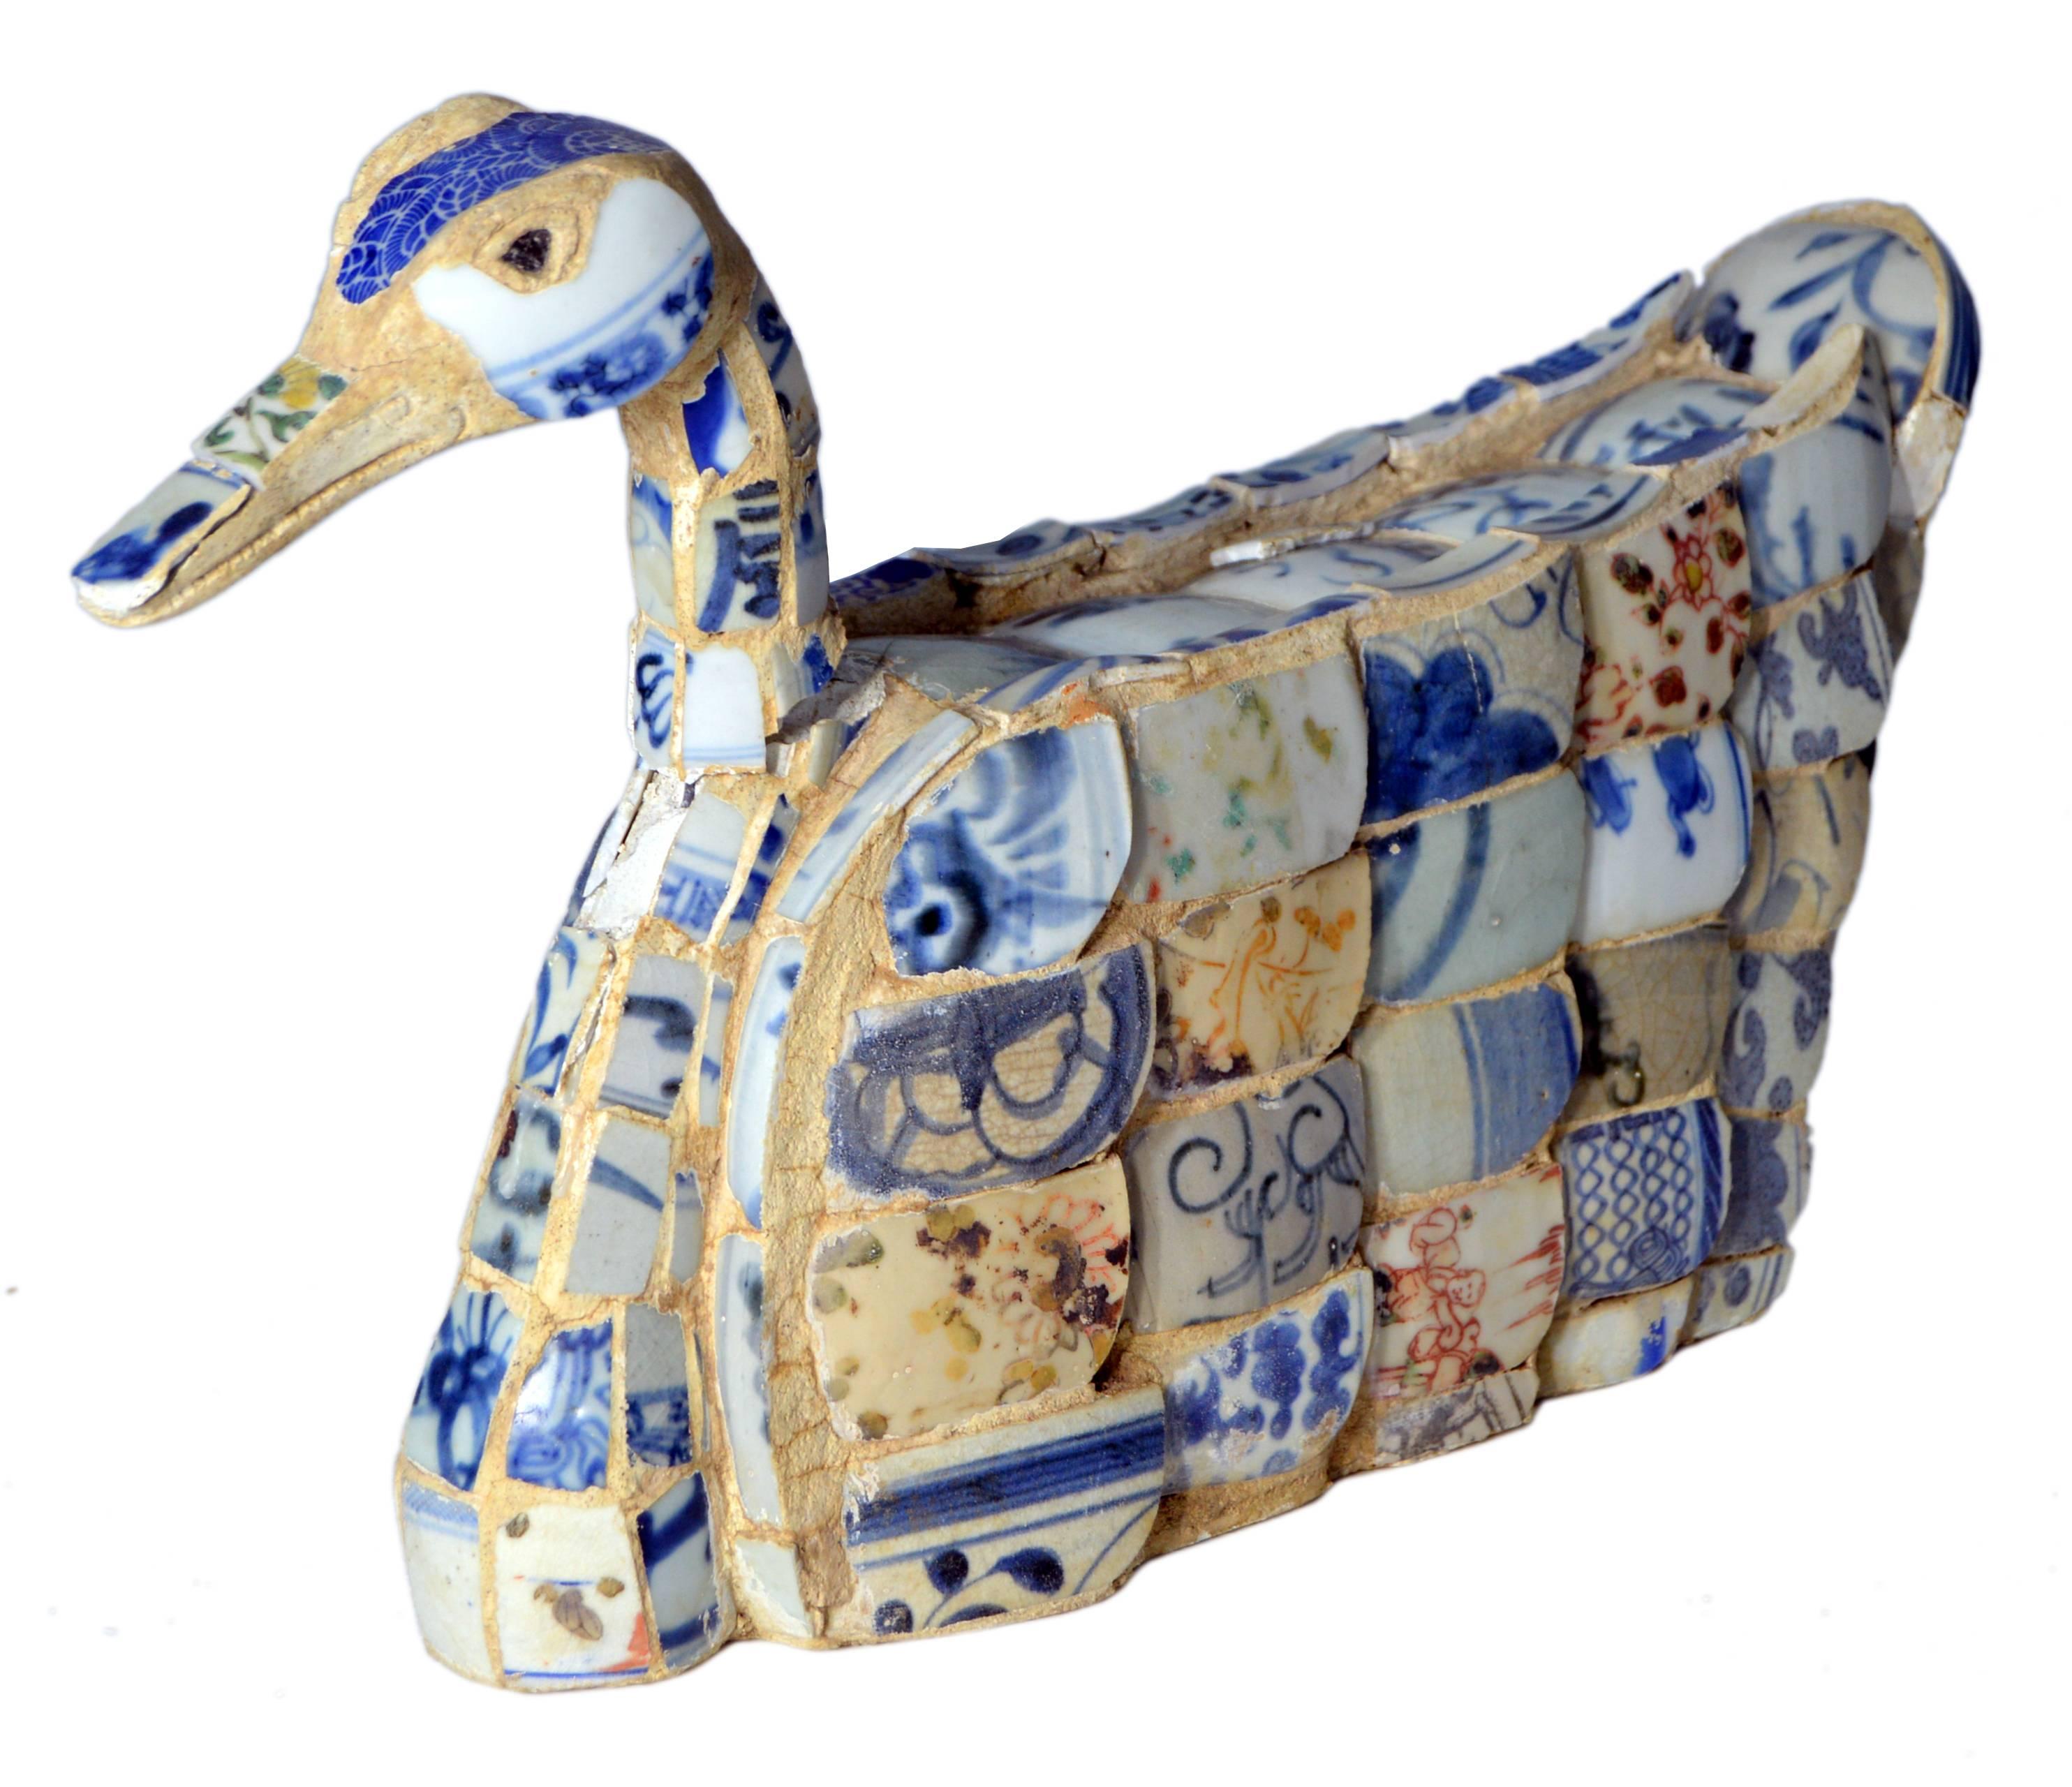 A  Chinese faience duck sculpture with blue oriental accents. Faience is tin-glazed pottery on a delicate pale buff earthenware body, a Chinese technique the Dutch copied in 17th century as part of their development of the Delftware technique. This